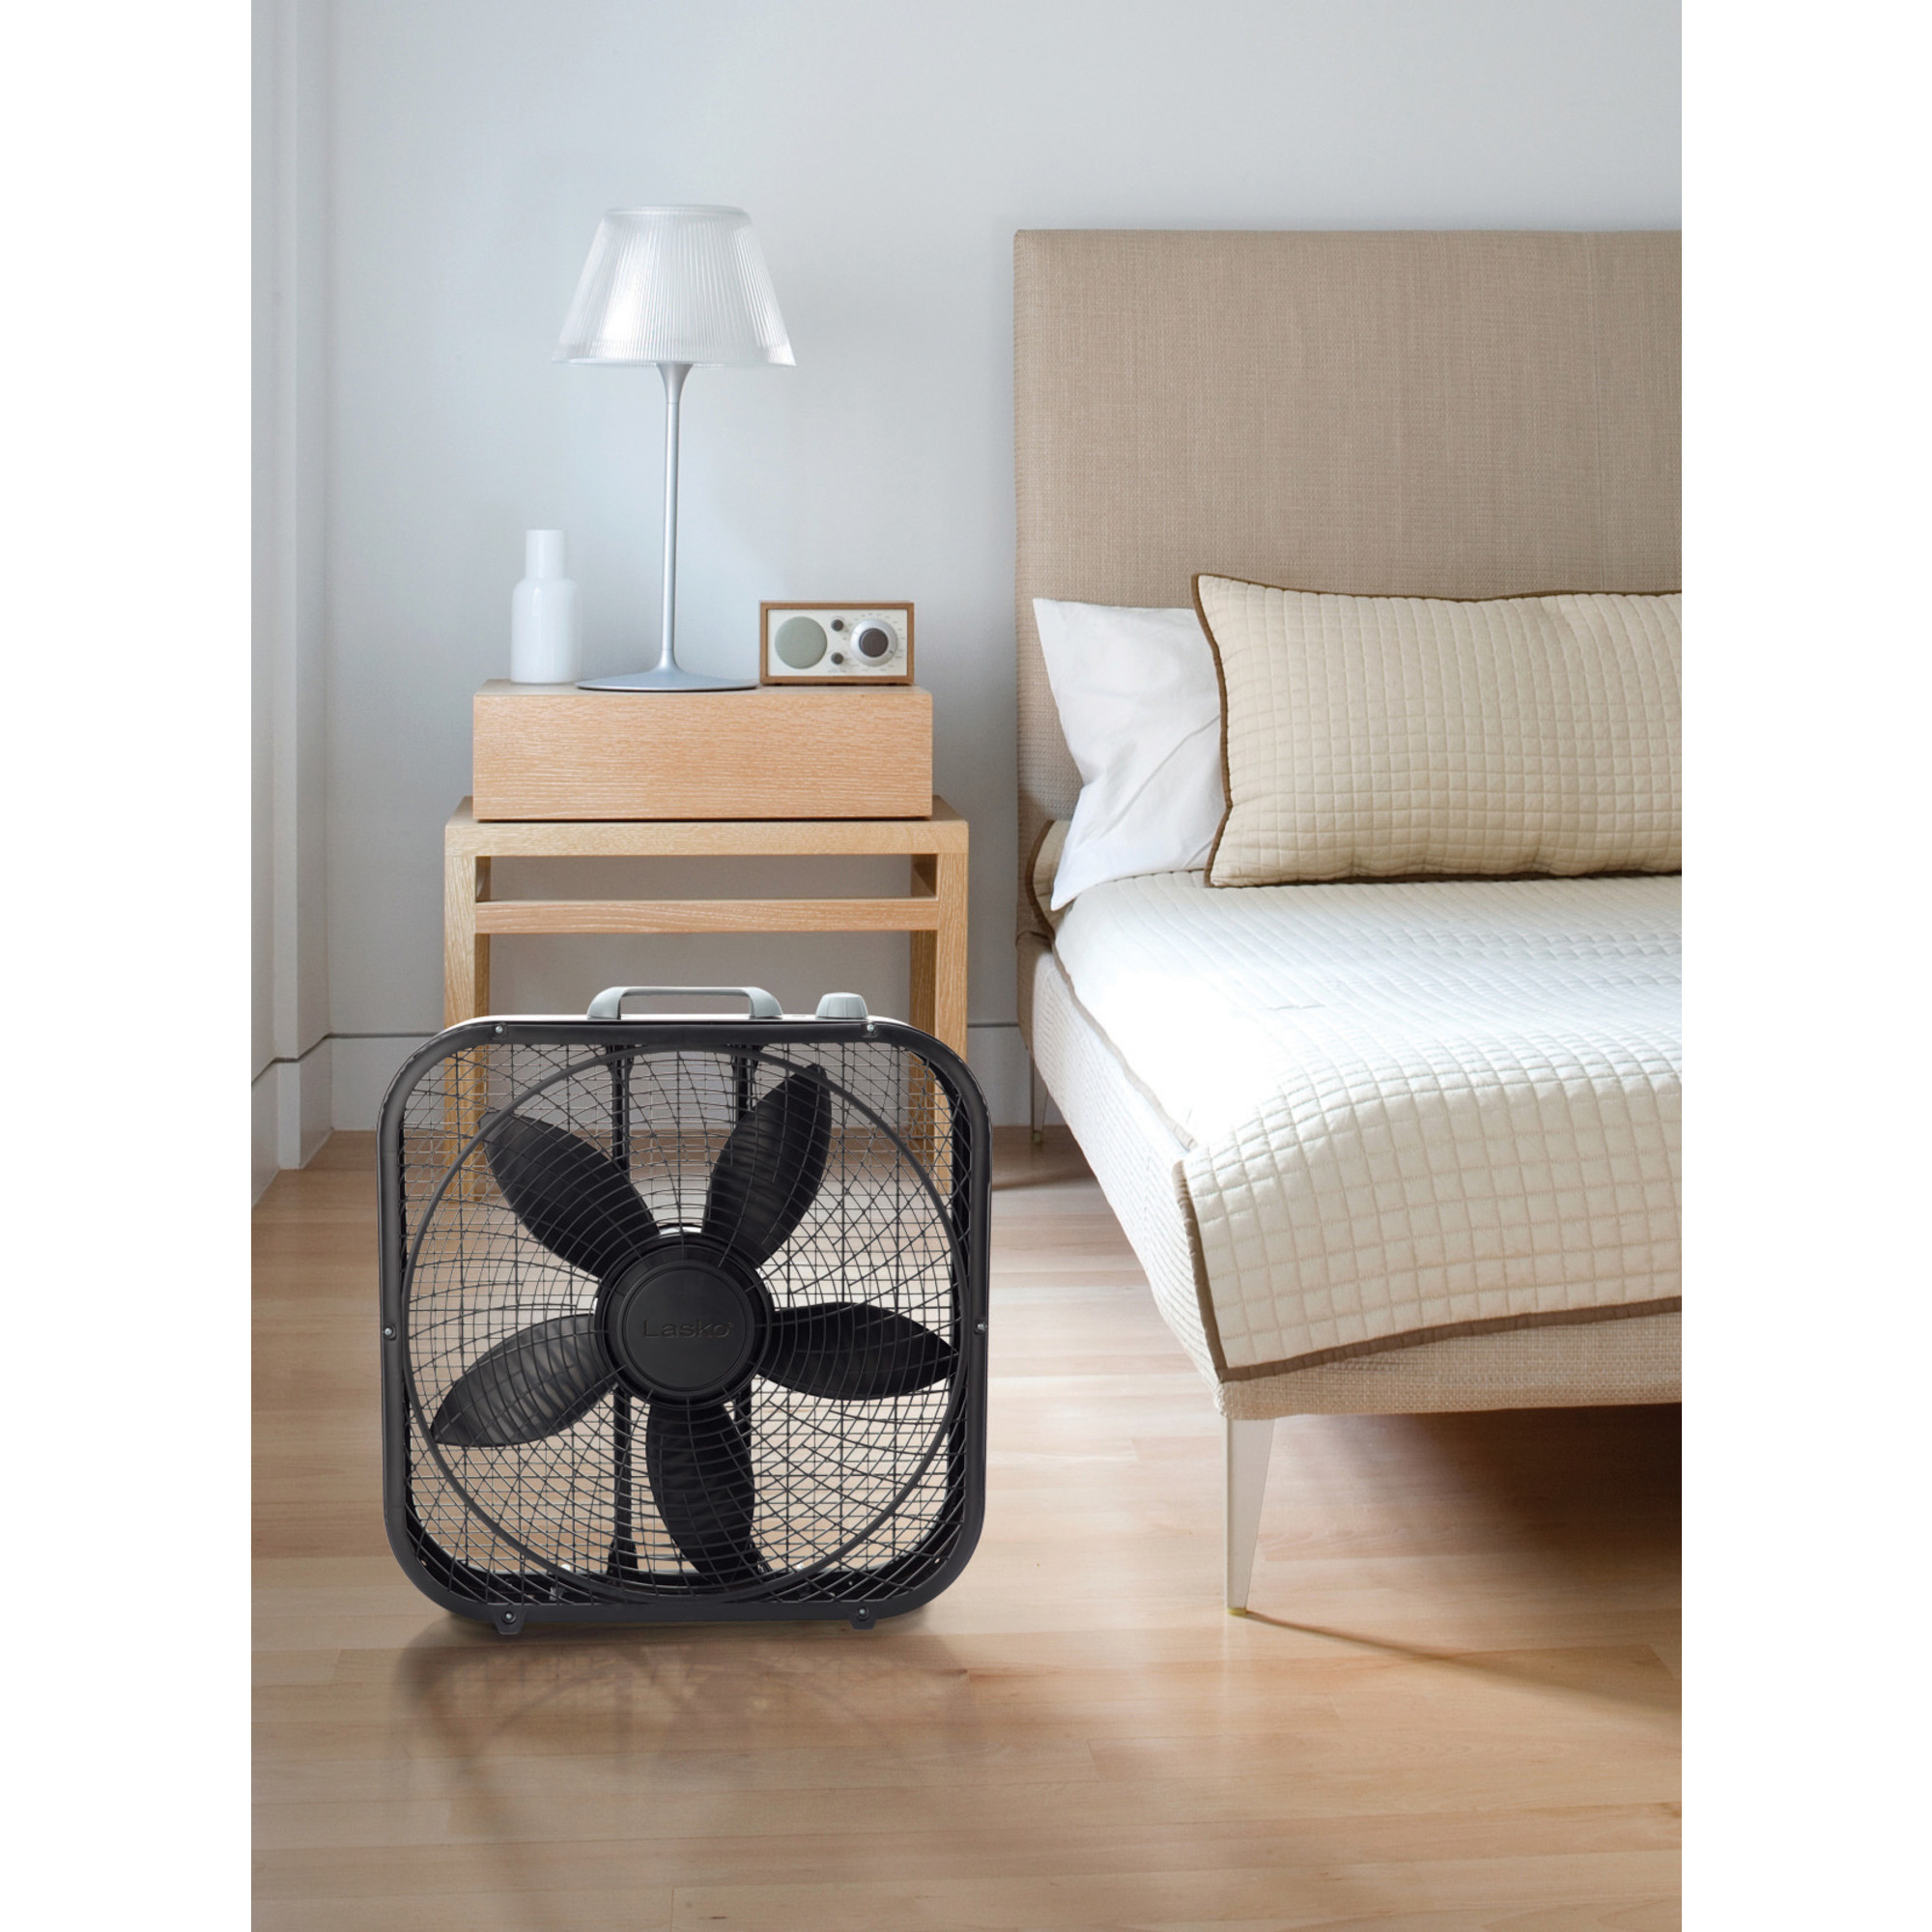 Lasko Cool Colors 20" Weather Resistant Box Fan, with 3-Speeds, 22" H,  Black, B20301, New - image 4 of 5